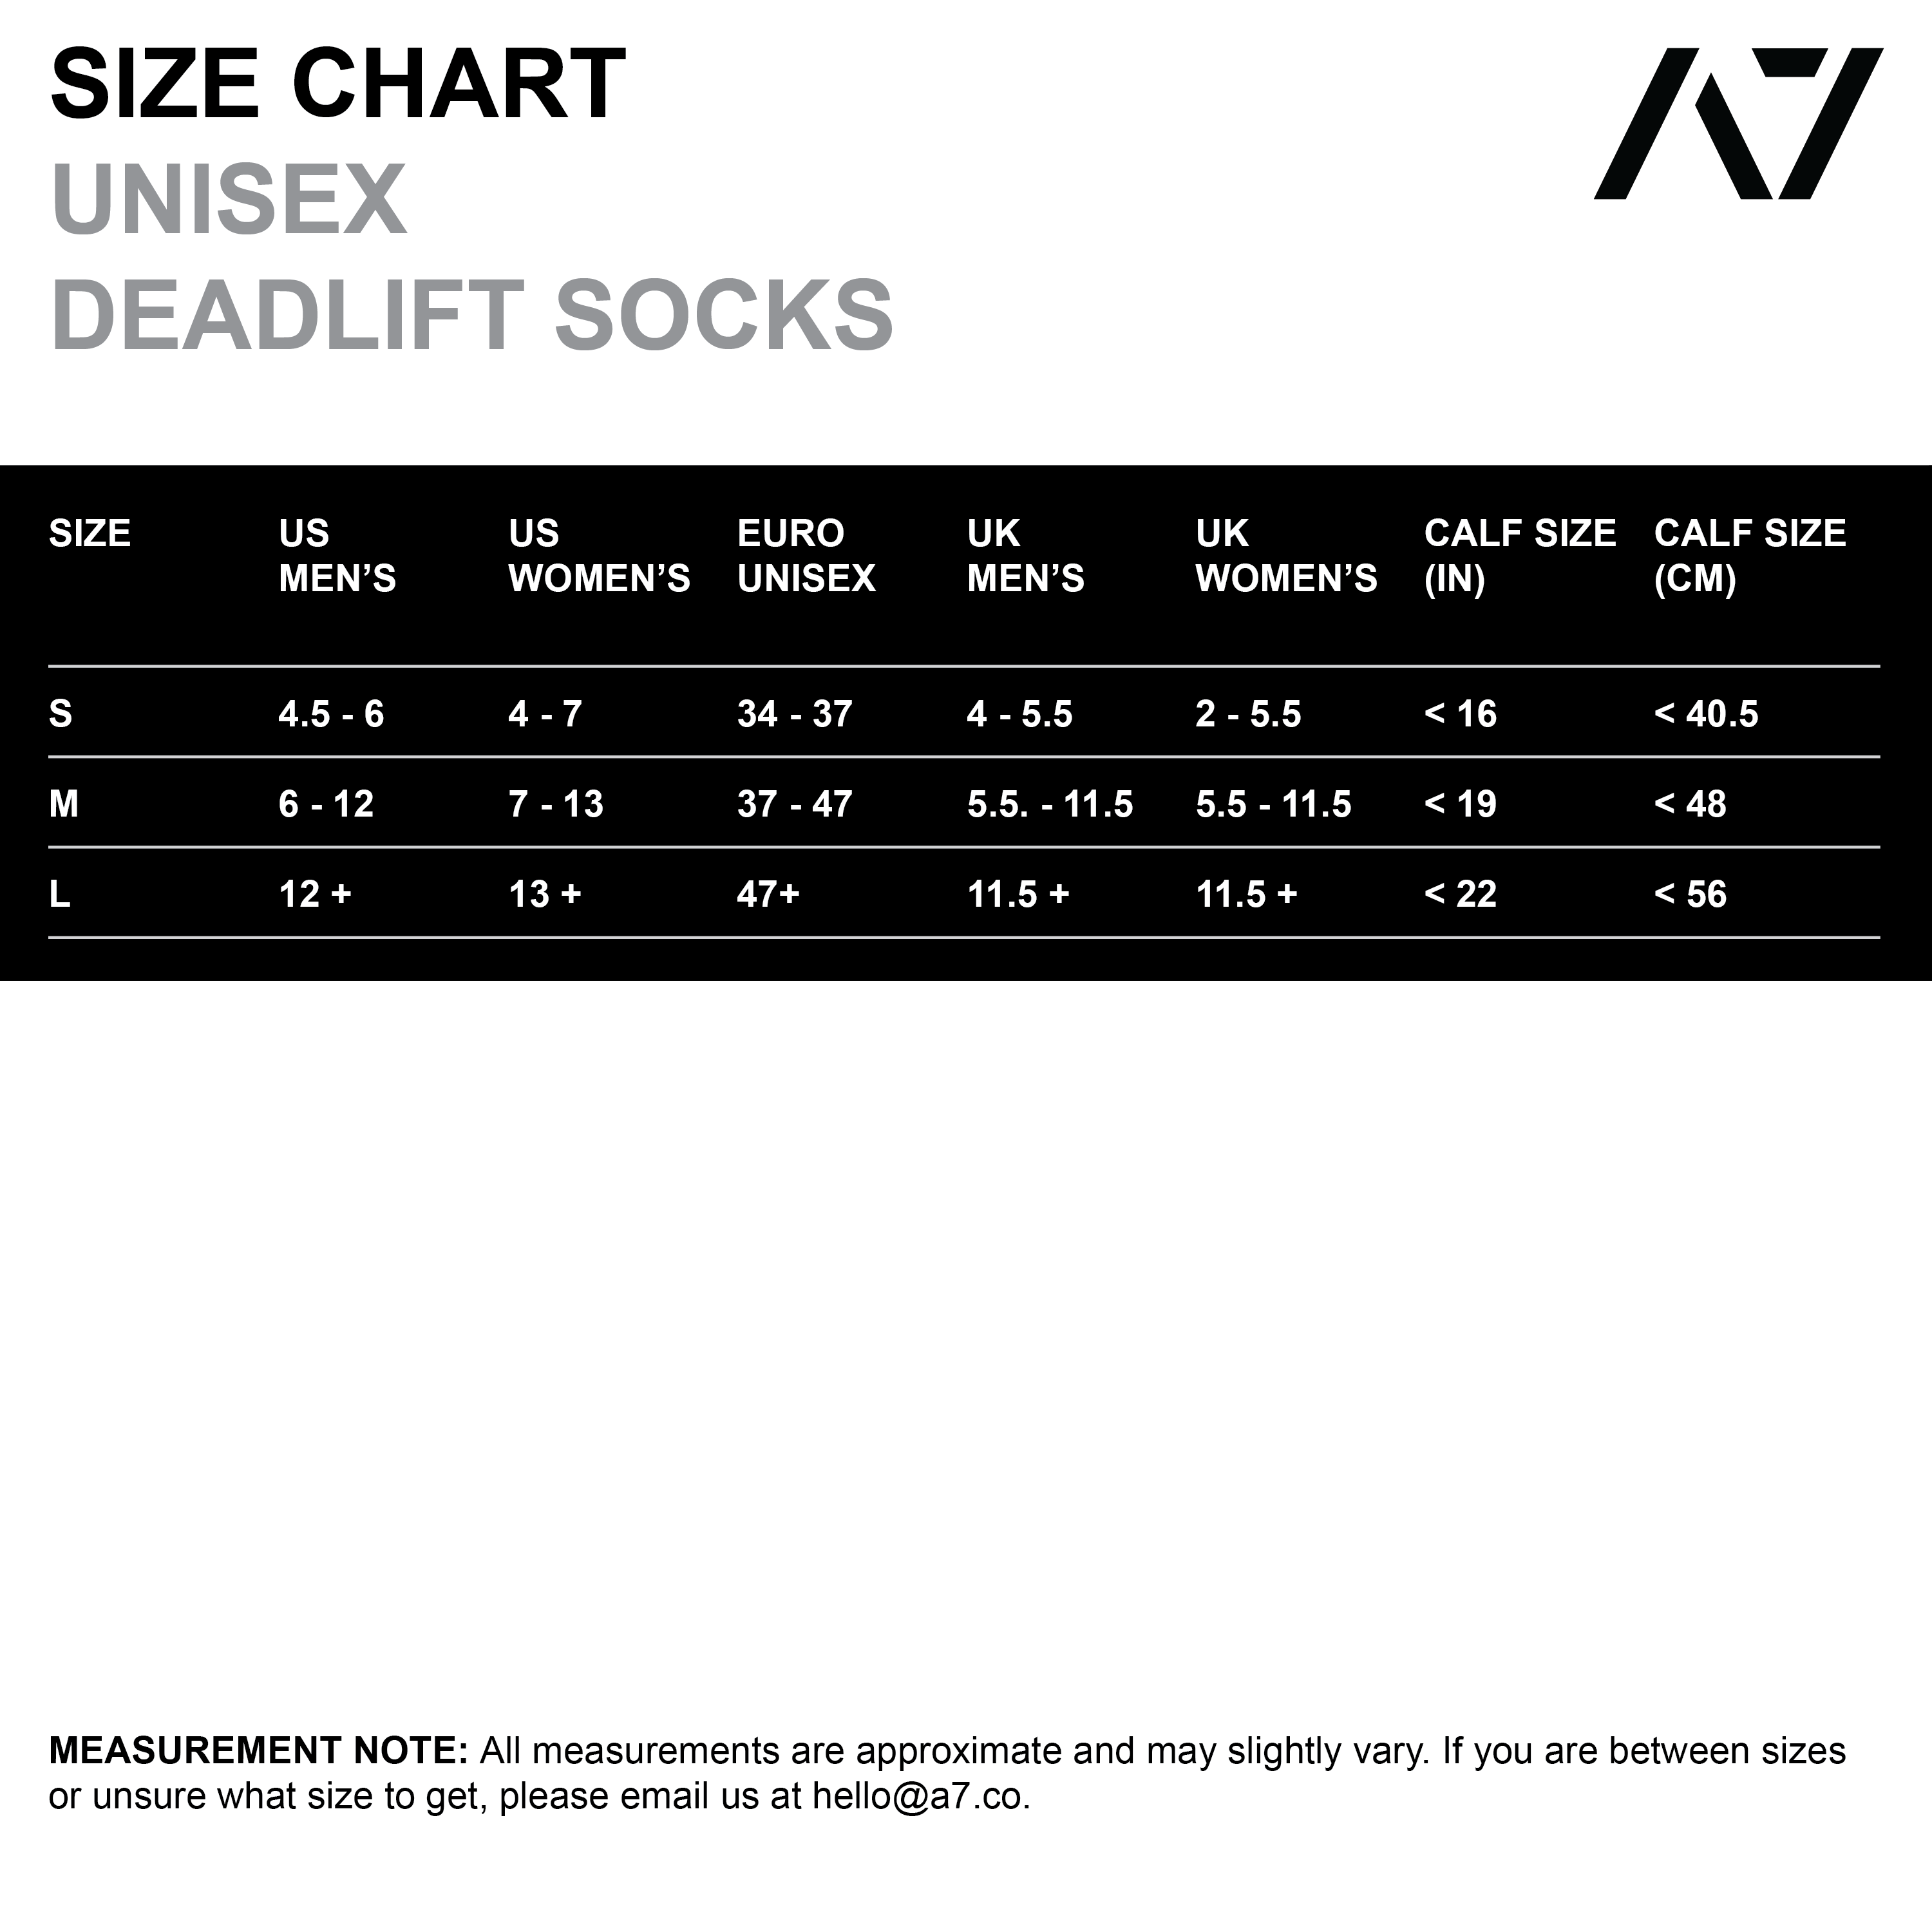 A7 Ivory Rose deadlift socks are designed specifically for pulls and keep your shins protected from scrapes. A7 deadlift socks are a perfect pair to wear in training or powerlifting competition. The A7 IPF Approved Kit includes Powerlifting Singlet, A7 Meet Shirt, A7 Zebra Wrist Wraps, A7 Deadlift Socks, Hourglass Knee Sleeves (Stiff Knee Sleeves and Rigor Mortis Knee Sleeves). All A7 Powerlifting Equipment shipping to UK, Norway, Switzerland and Iceland.